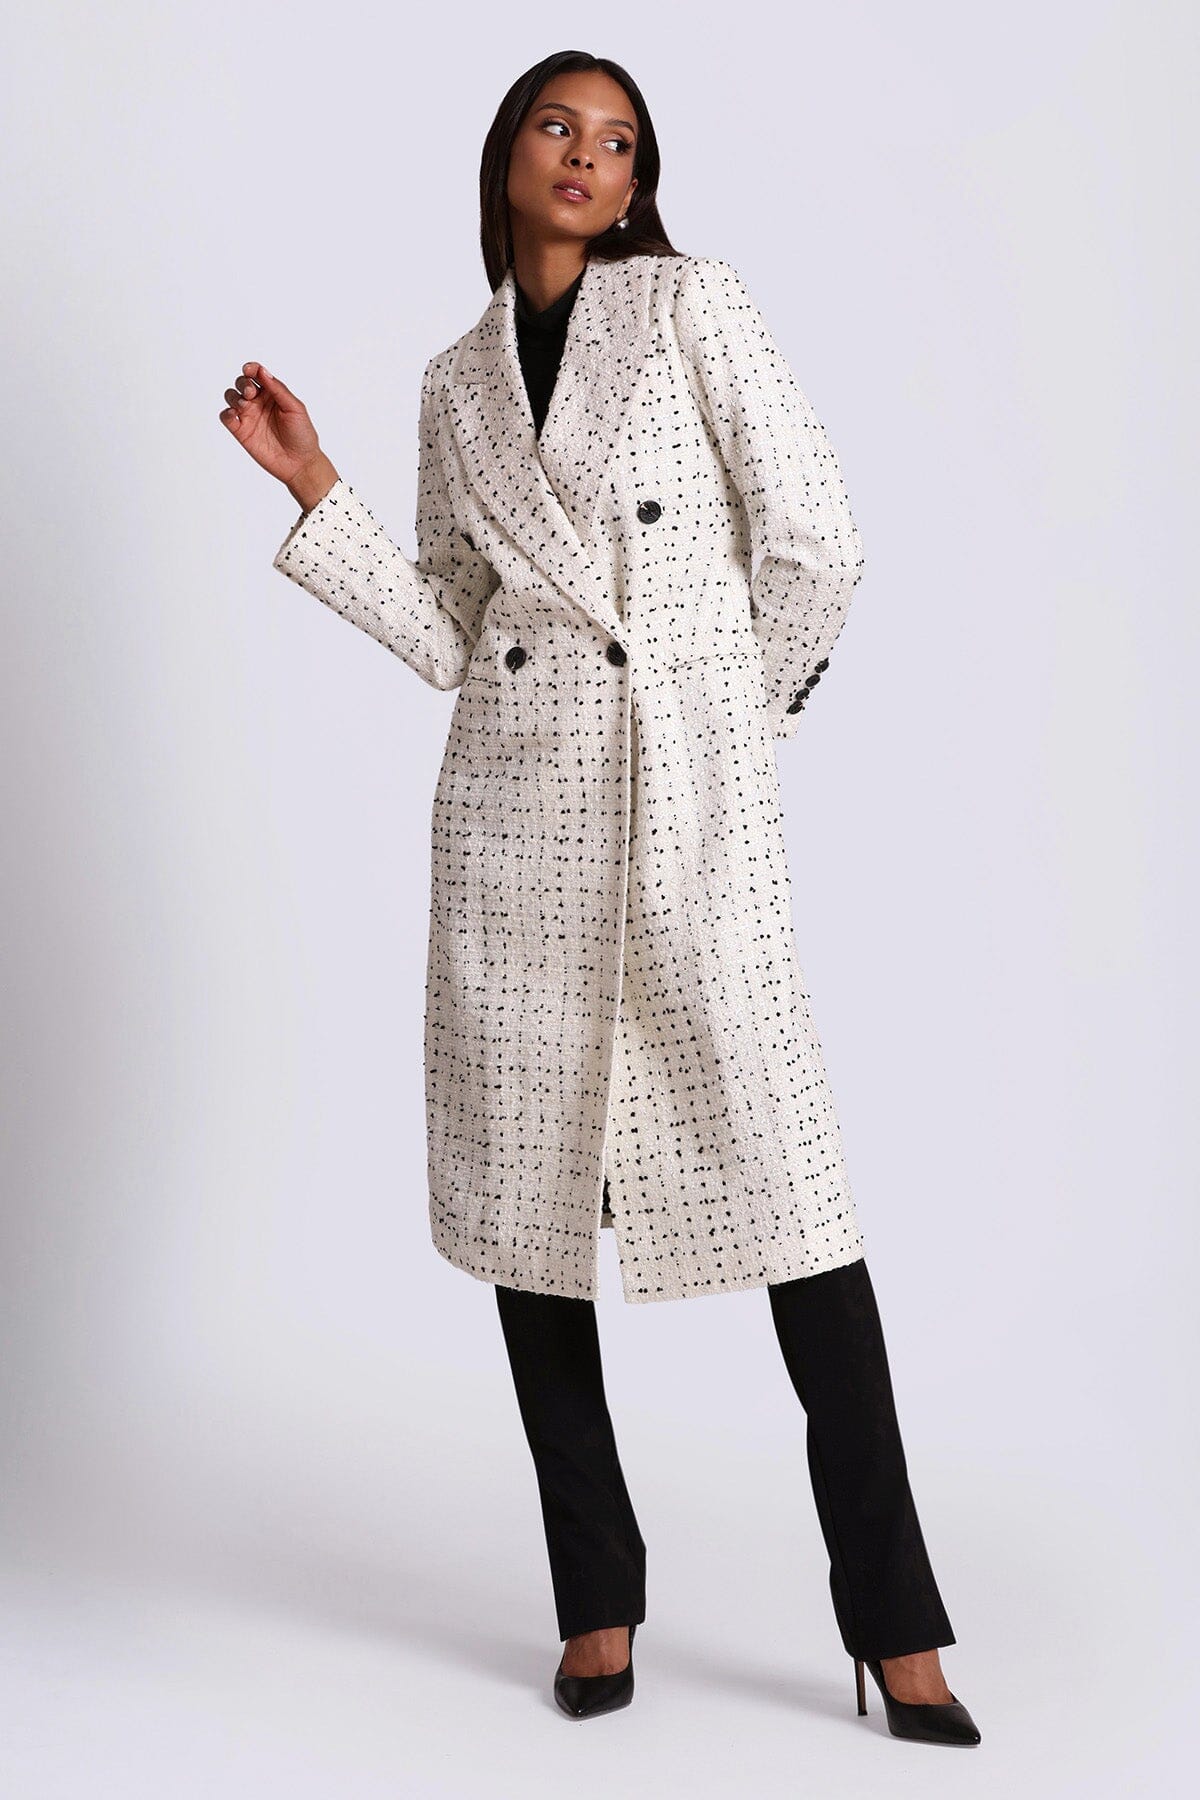 Black and white tweed tailored double breasted longline coat jacket - women's figure flattering luxurious long coats for winter fashion trends